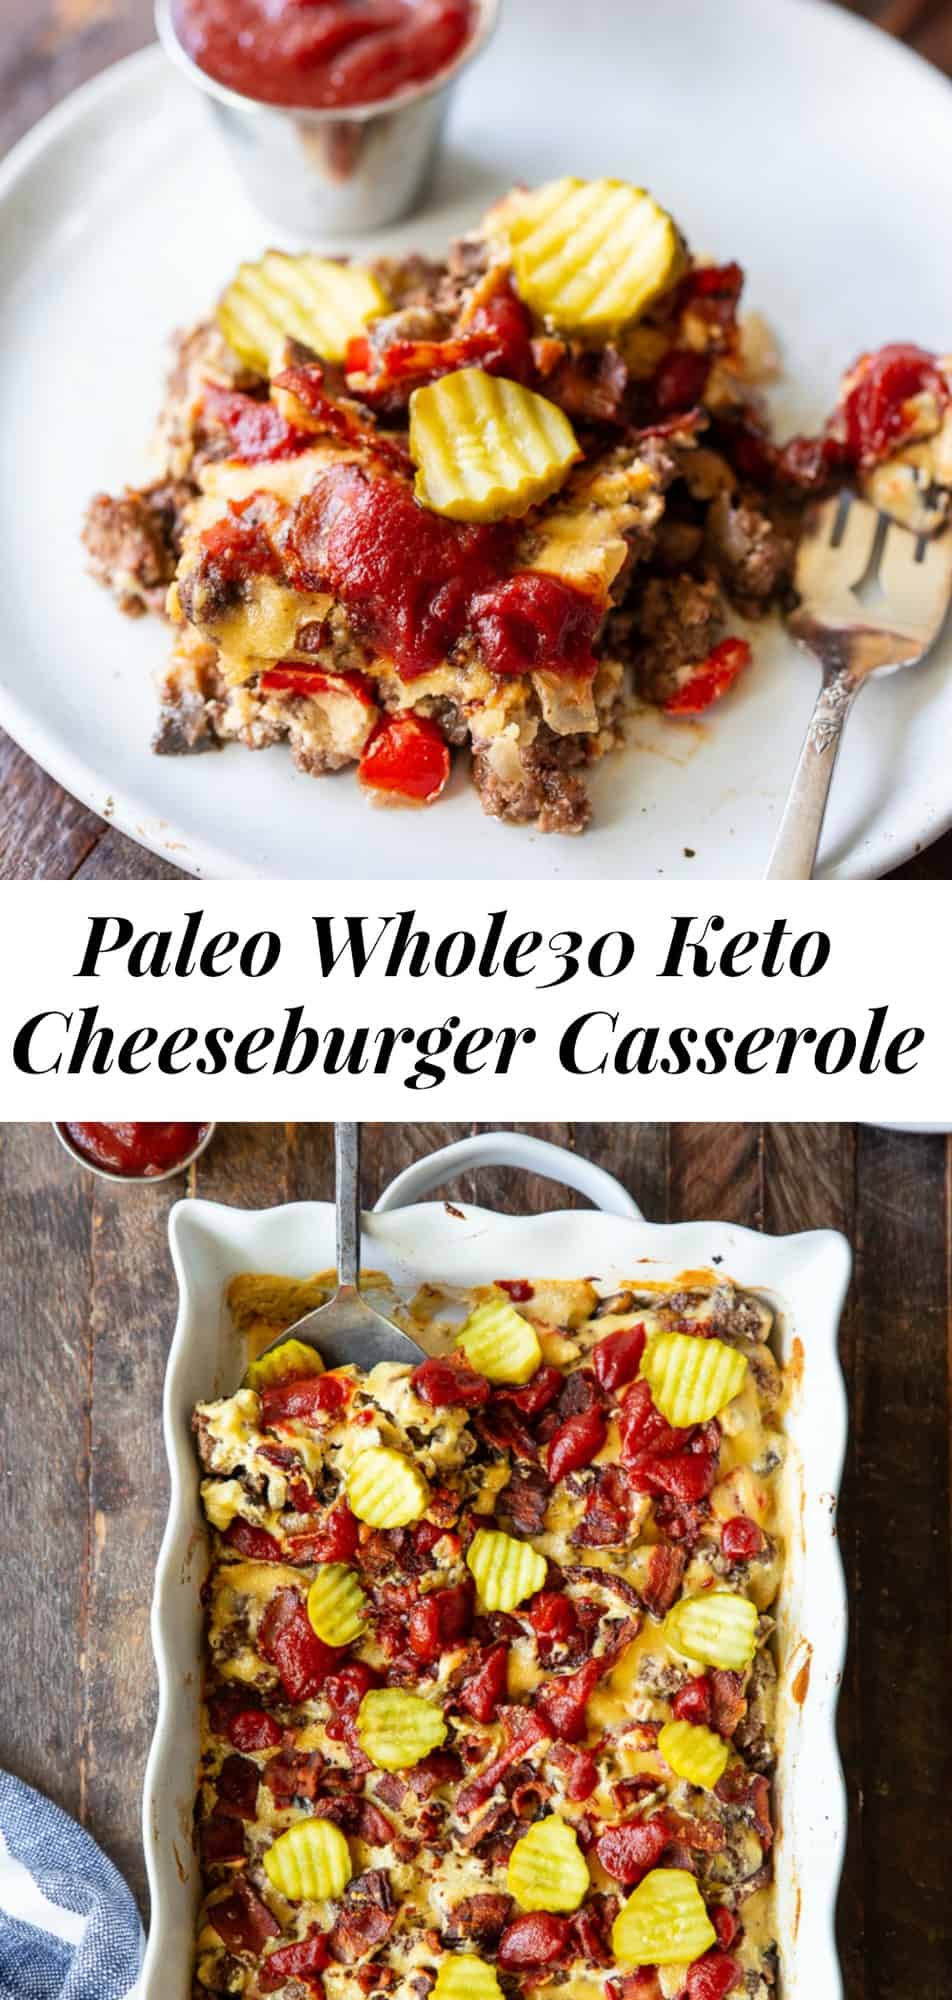 This bacon cheeseburger casserole tastes so much like the real deal that no one would guess there’s actually no cheese in it at all!  A creamy, dairy-free cheese sauce is layered with savory ground beef, veggies, and topped with crispy bacon for the ultimate comfort food casserole! #paleo #whole30 #keto #cleaneating